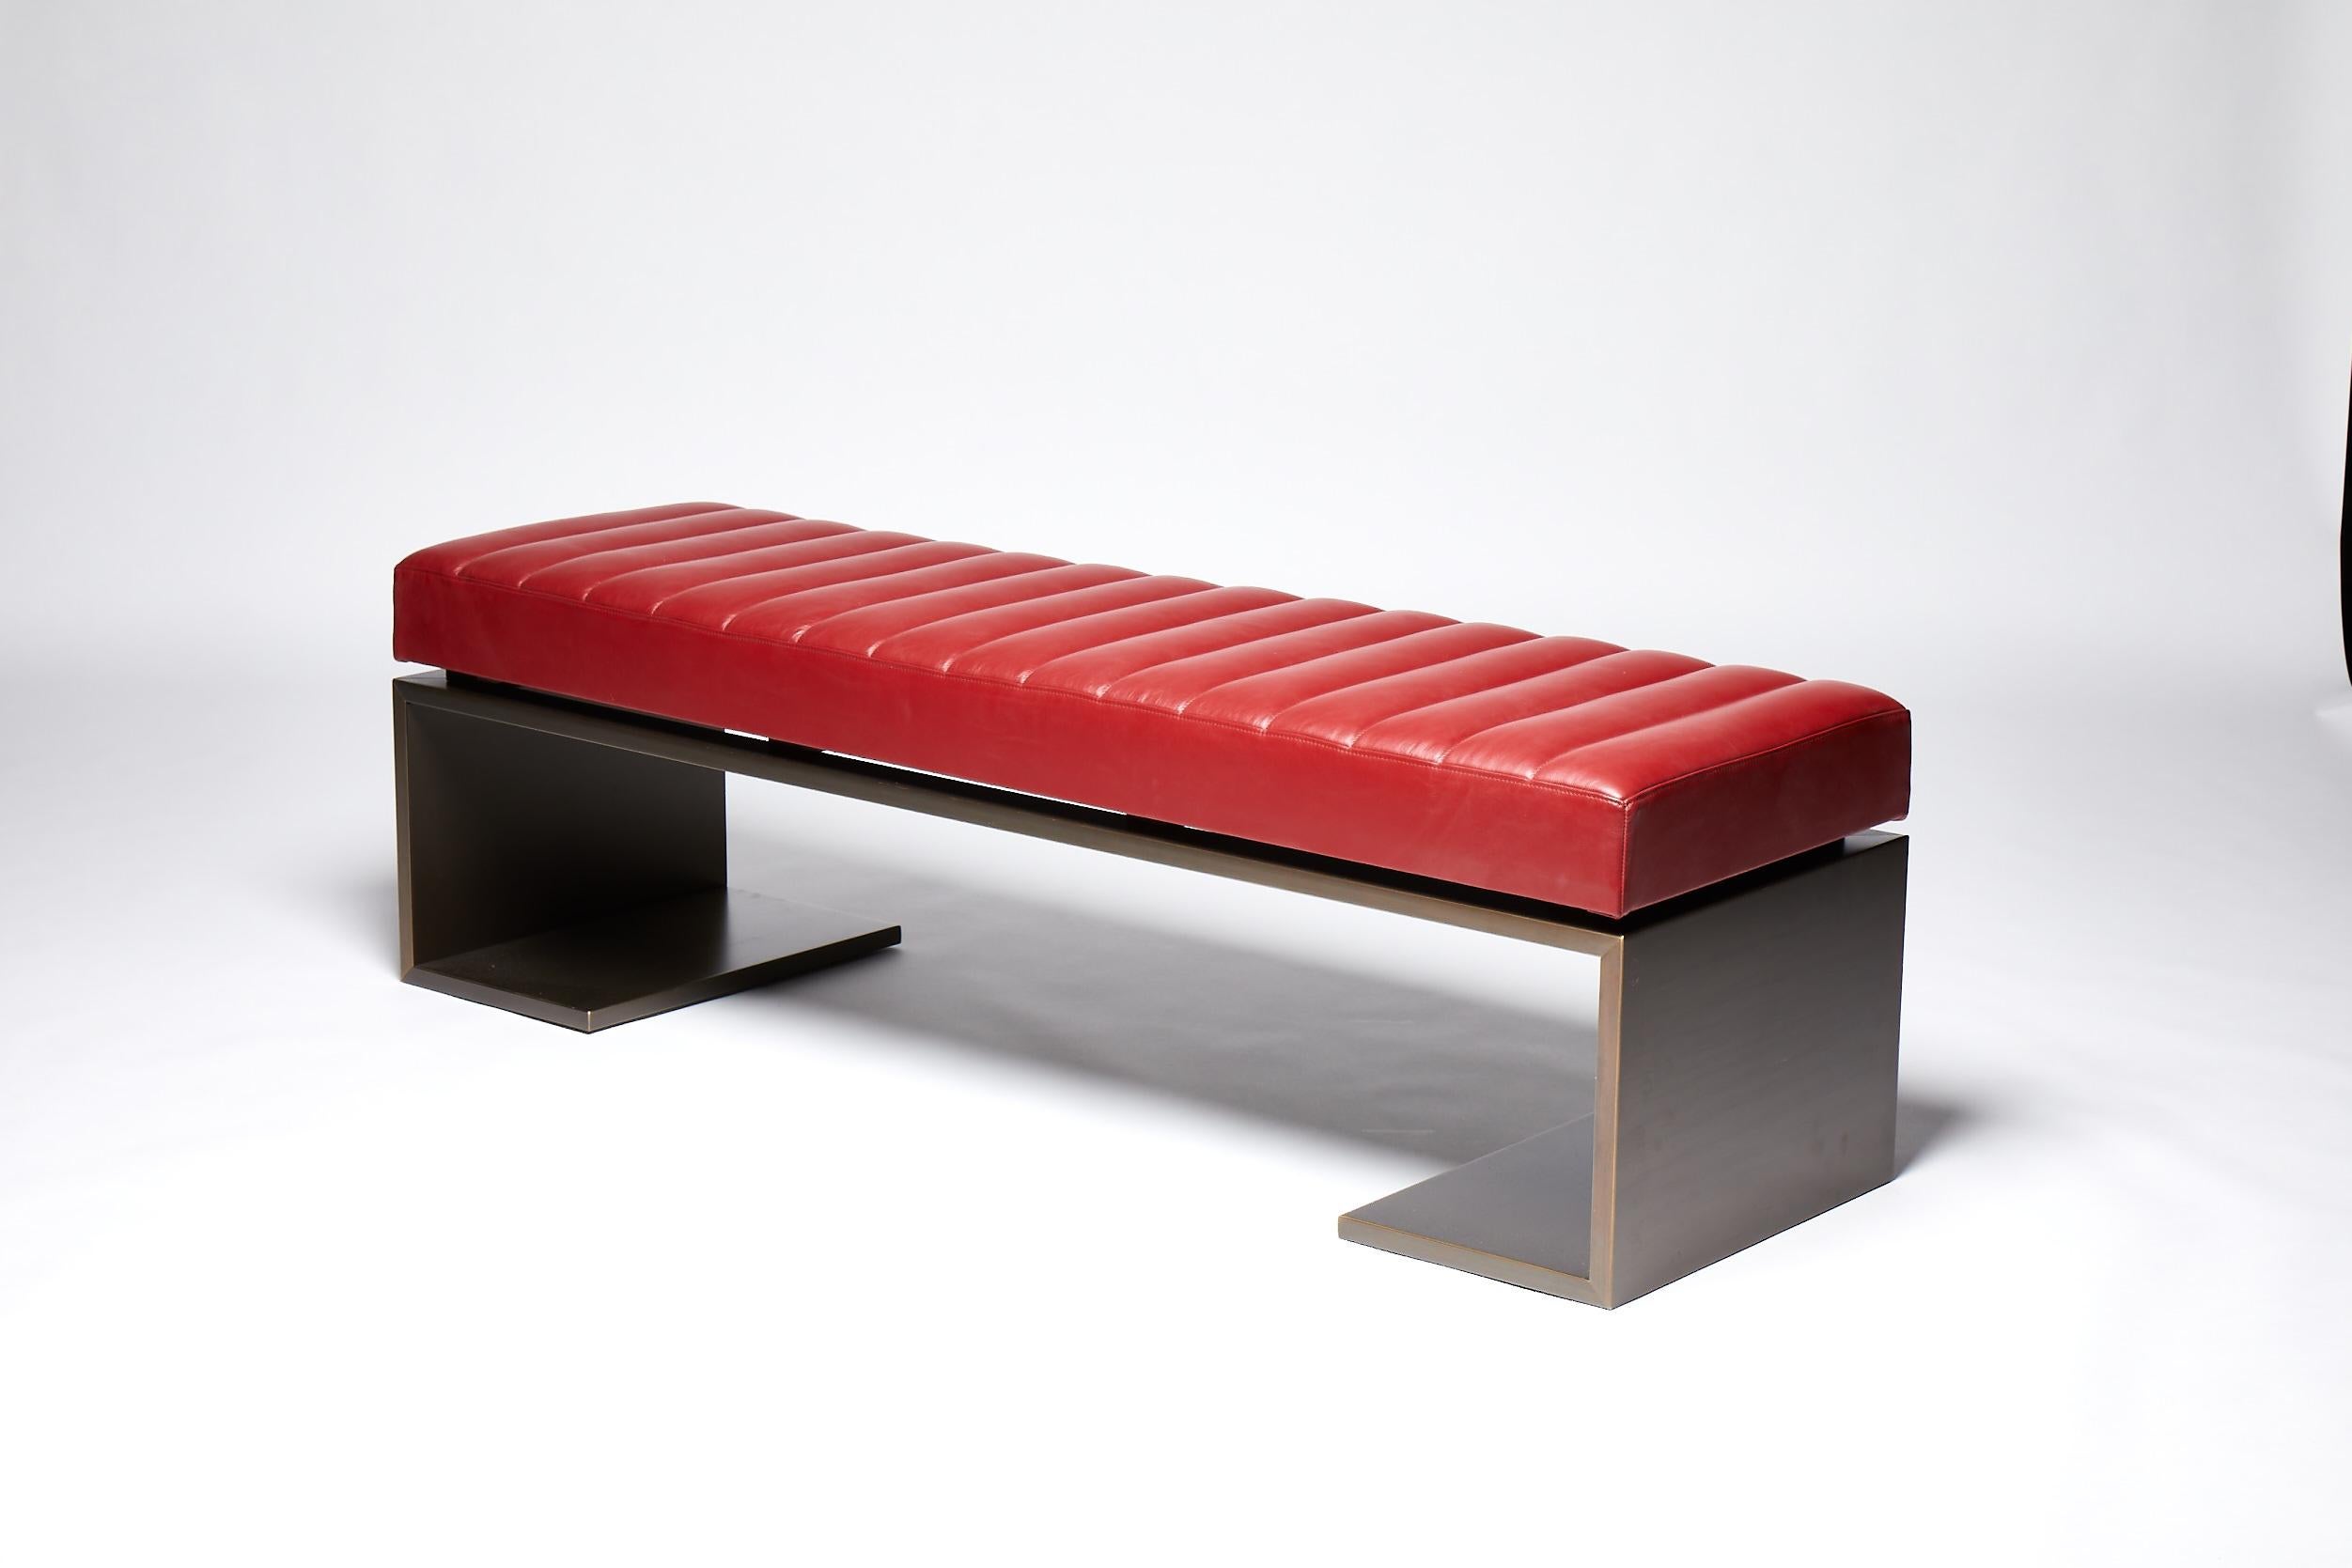 Brushed Bronze & Leather Bench, KIMANI, by Reda Amalou Desgin, 2018 - Gallery Collection For Sale